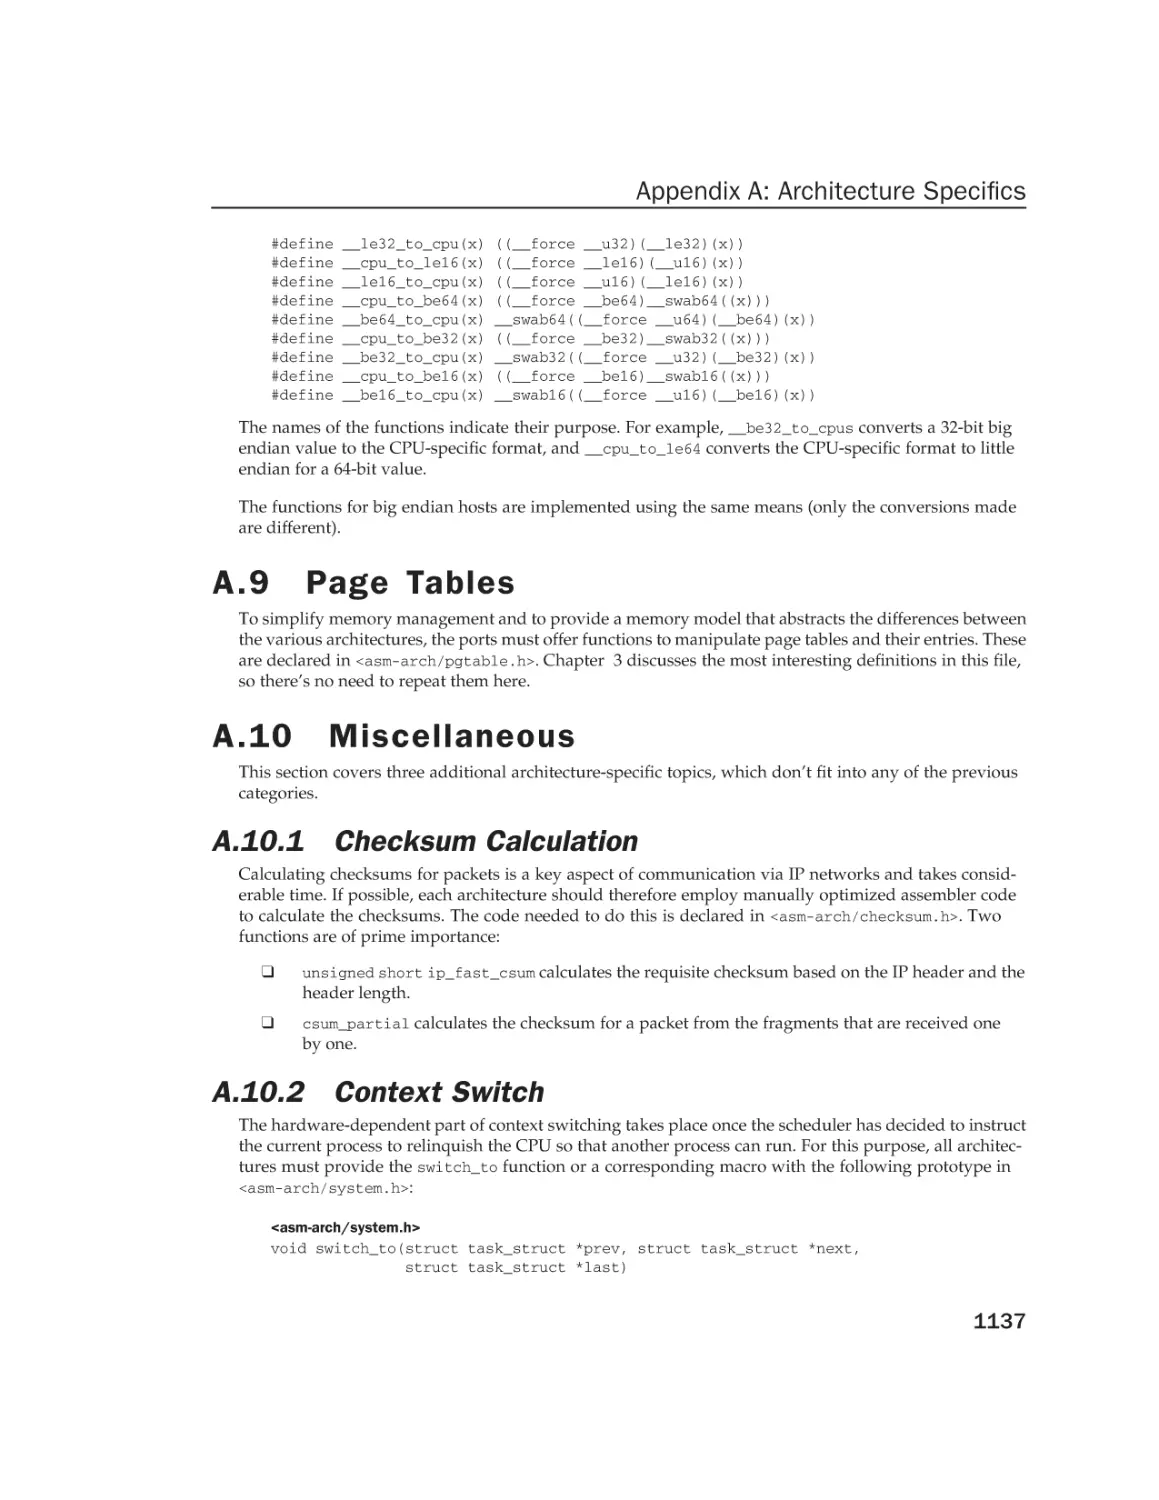 A.9 Page Tables
A.10 Miscellaneous